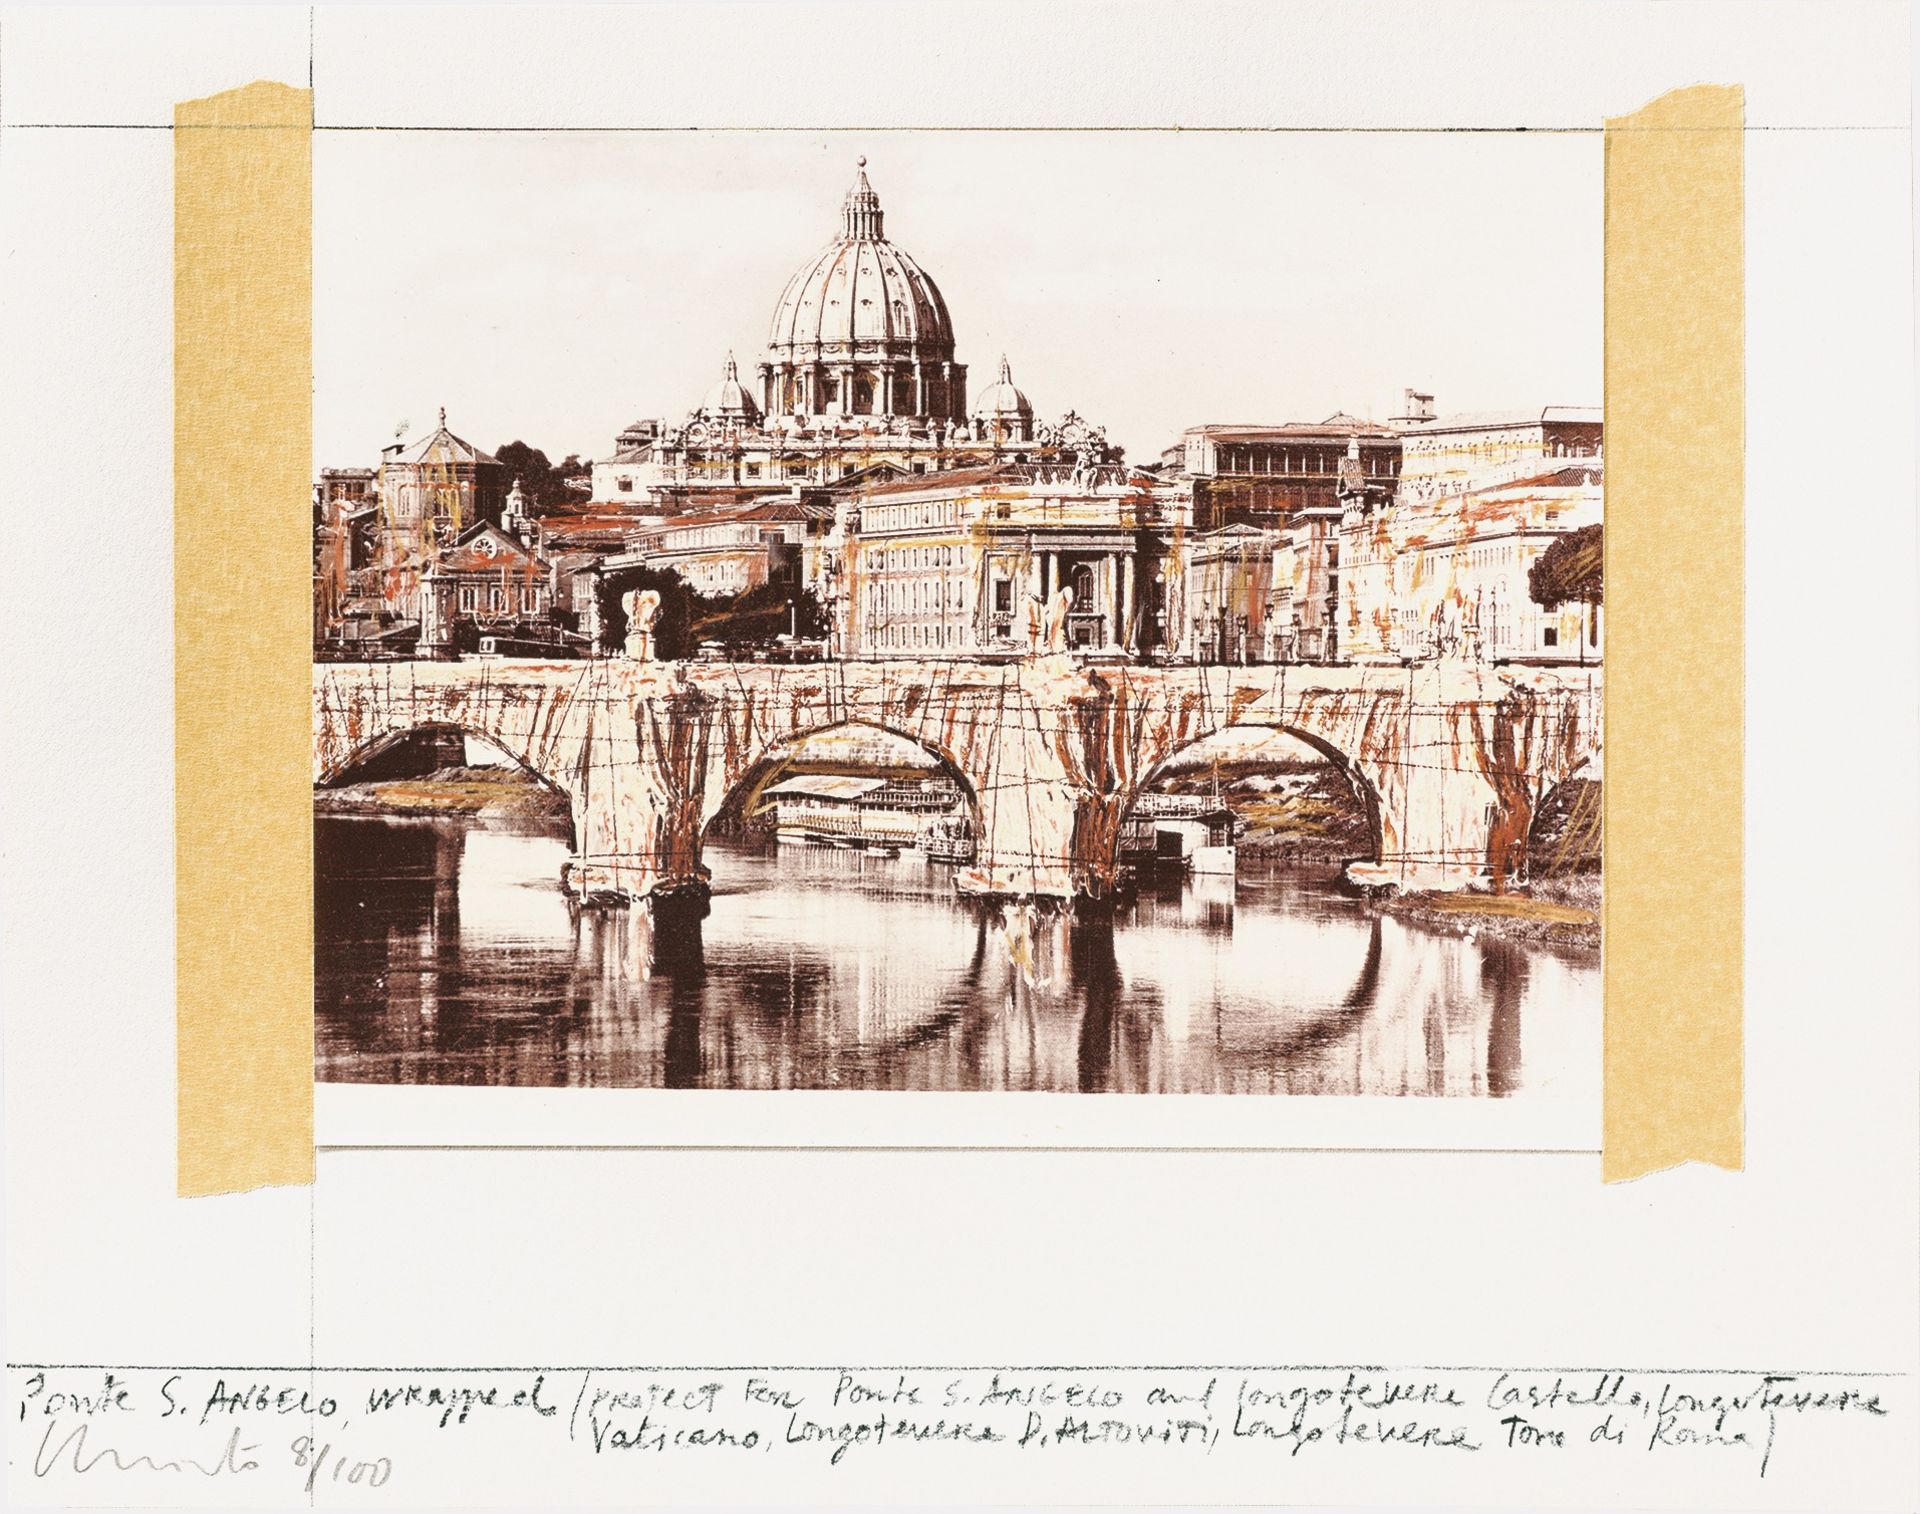 Christo. ”5 Urban Projects”. 1985 - Image 5 of 5